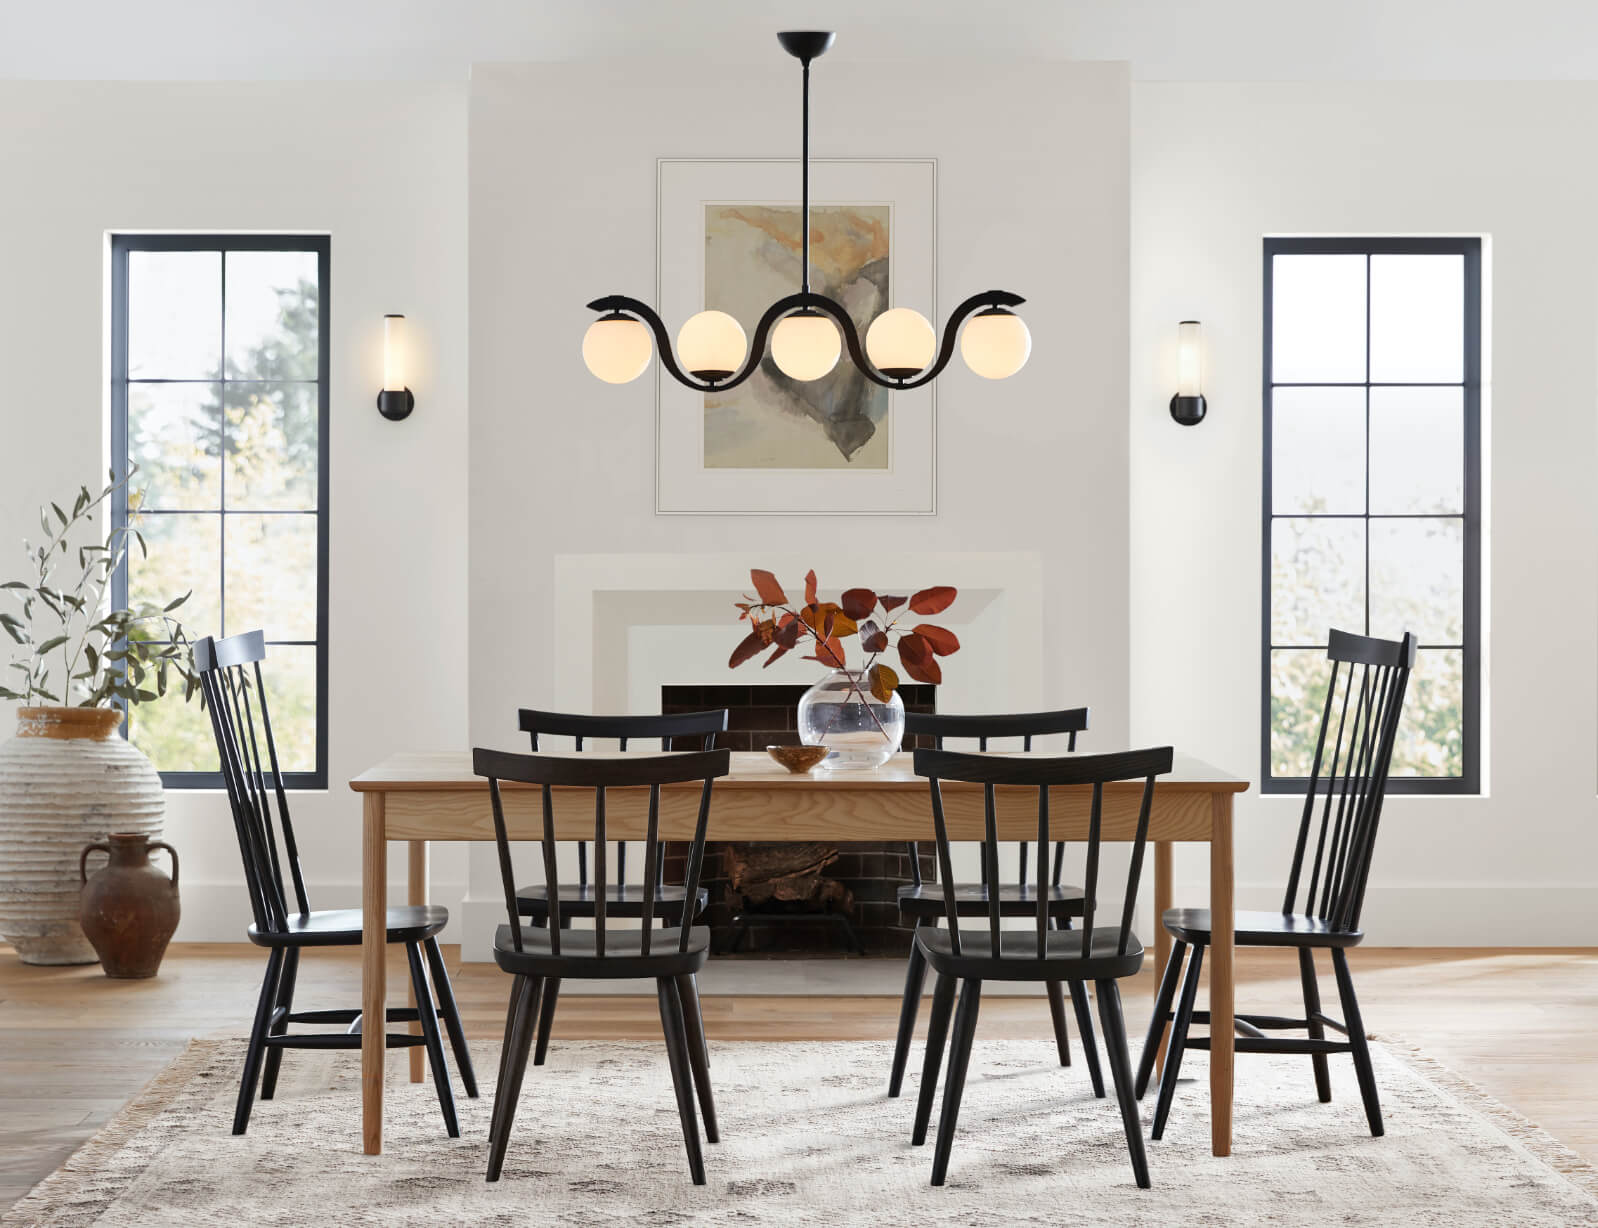 How To Choose Dining Room Lighting, What Size Chandelier Over Round Tablecloth